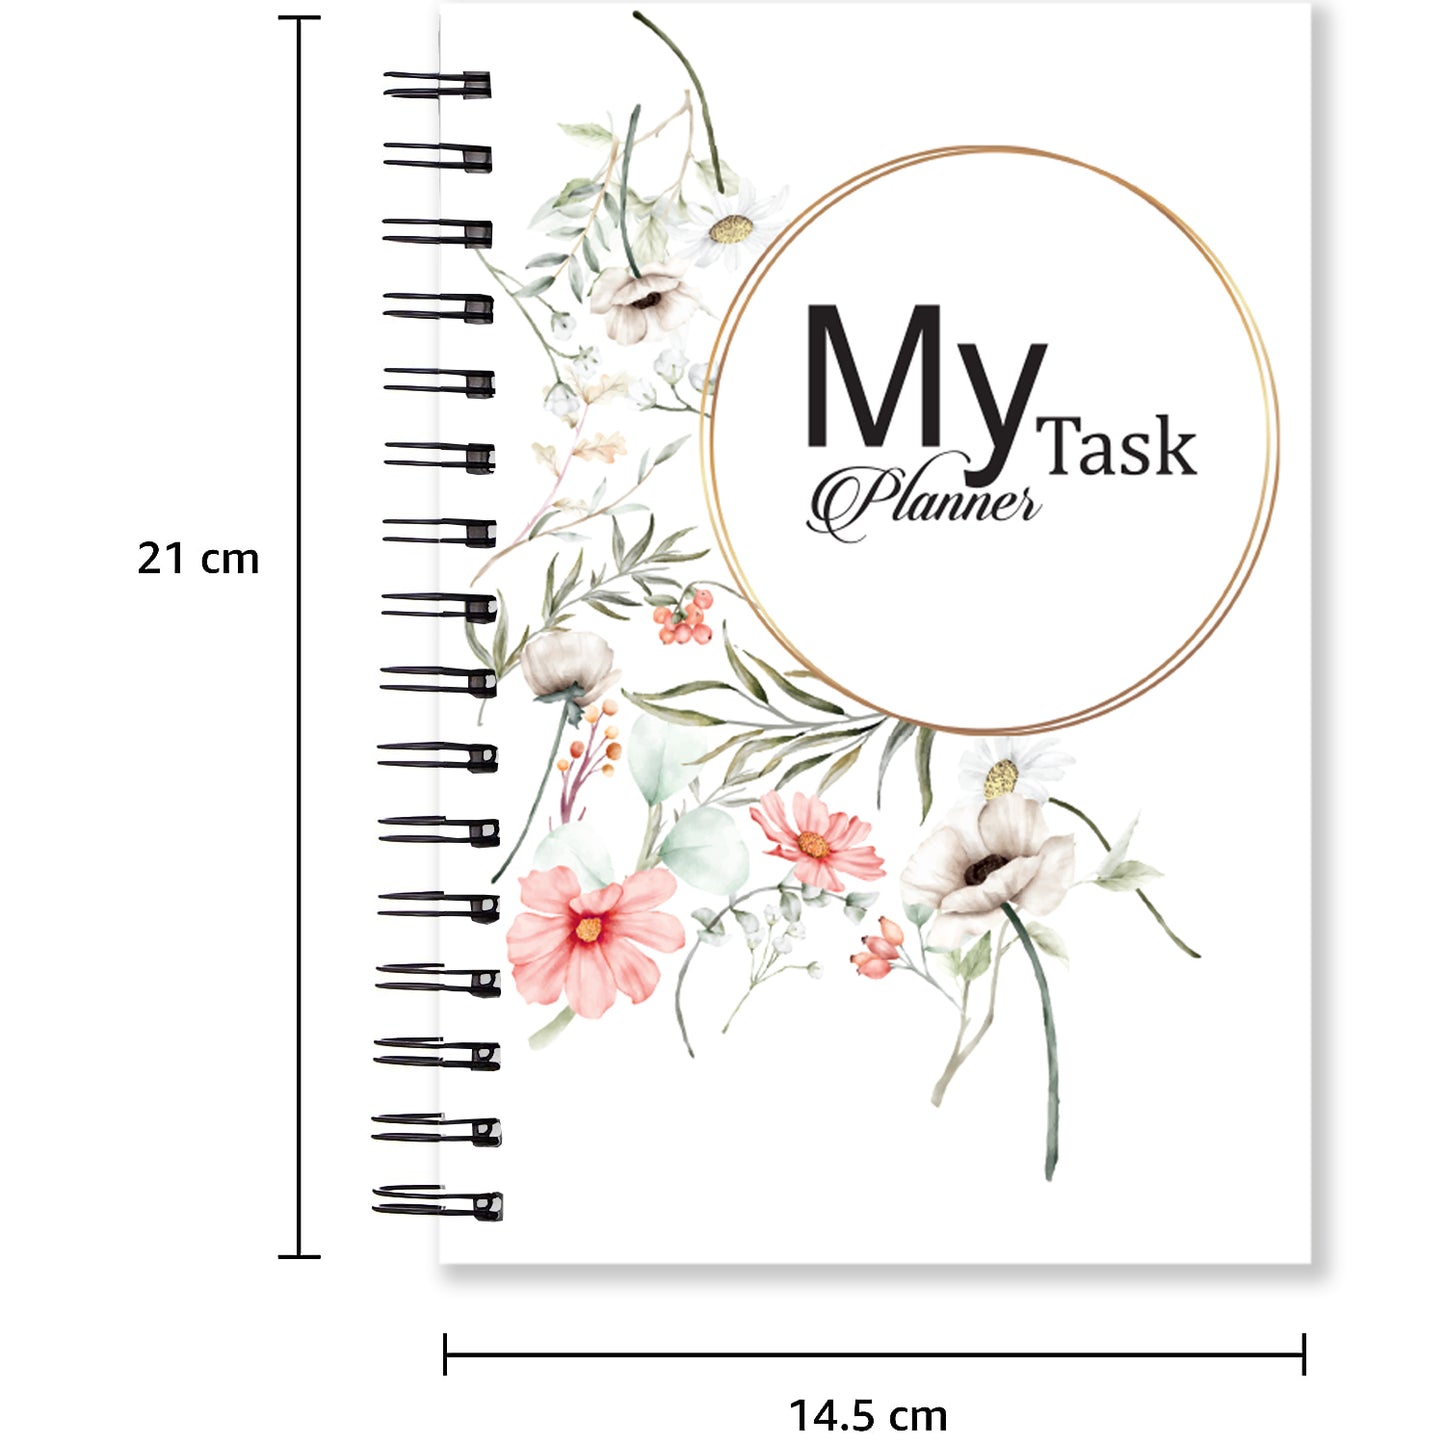 TASK PLANNER A5 Daily Schedule | To Do List | Meals Planner 150 Pages